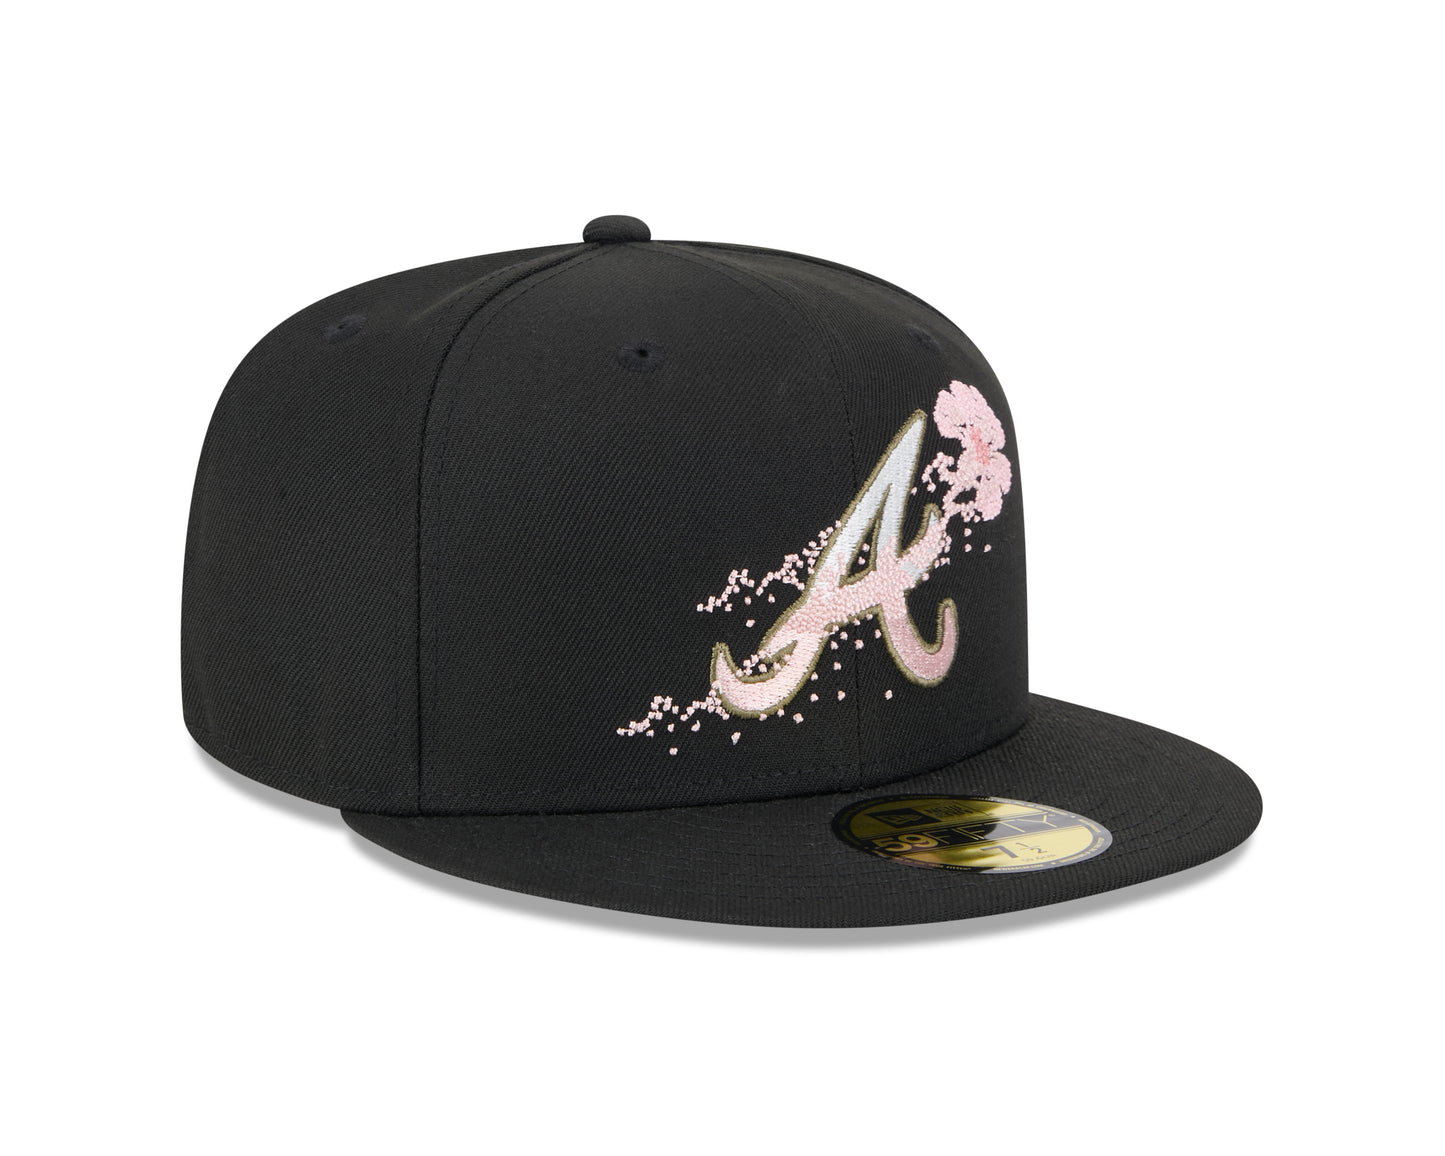 New Era - 59fifty Fitted Cap - Atlanta Braves - DOTTED FLORAL - Black - Headz Up 